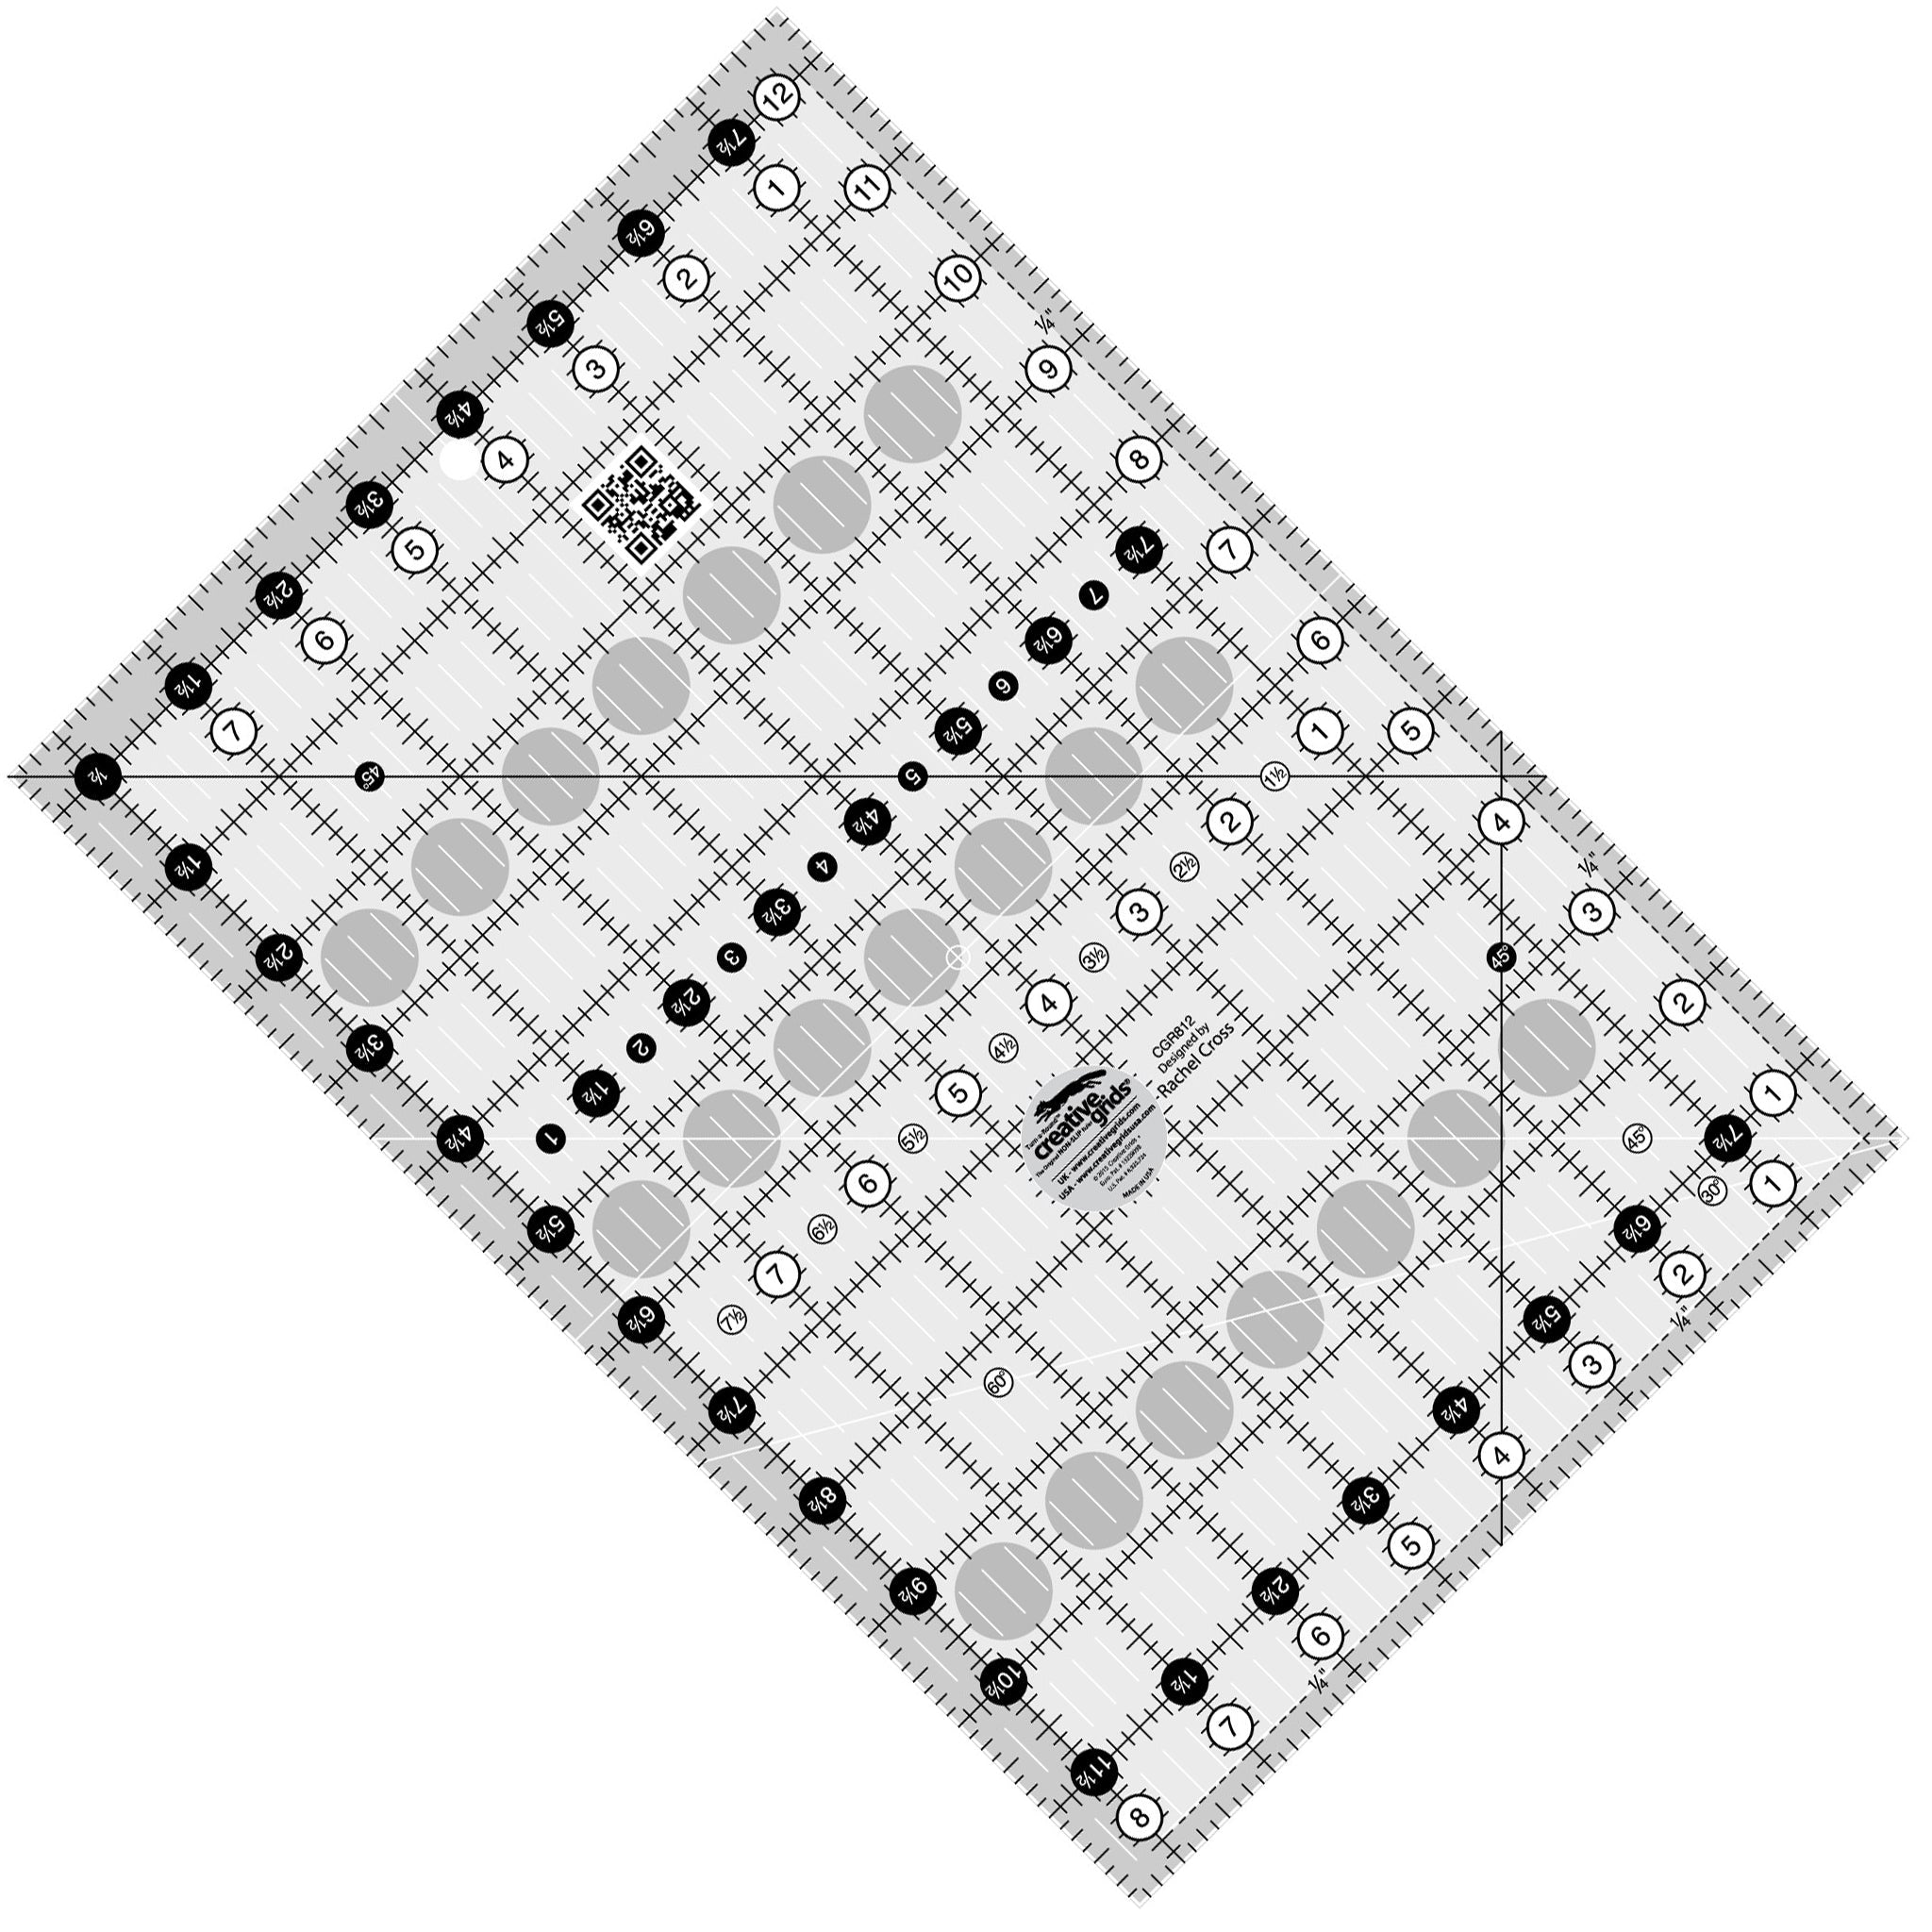 Creative Grids 8-1/2-Inch X 12-1/2-Inch Quilt Ruler (CGR812)